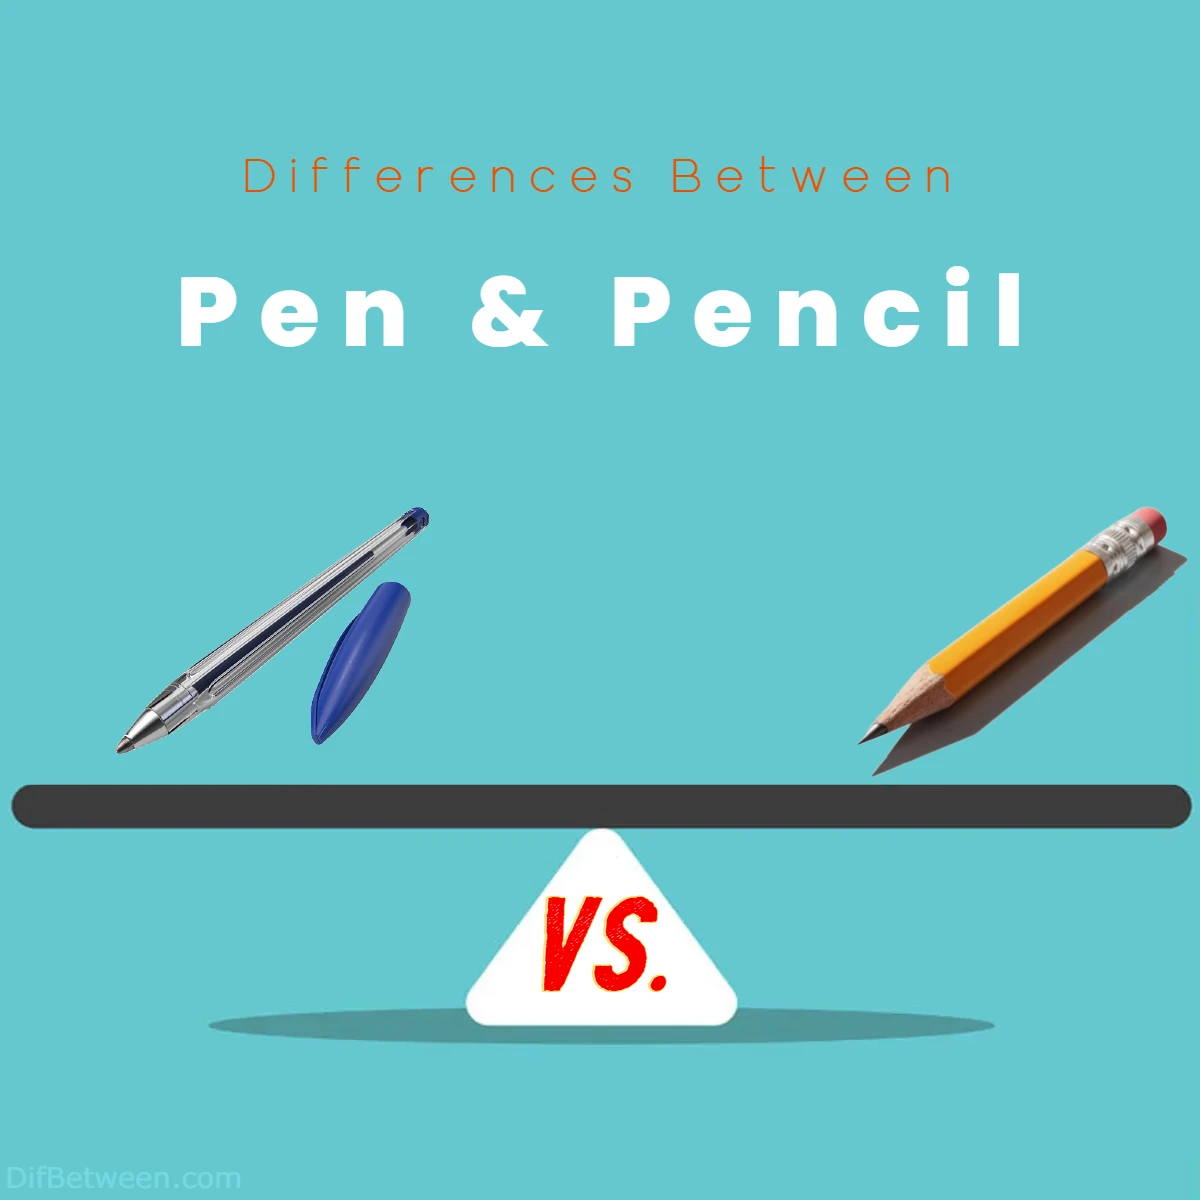 Differences Between pen and pencil